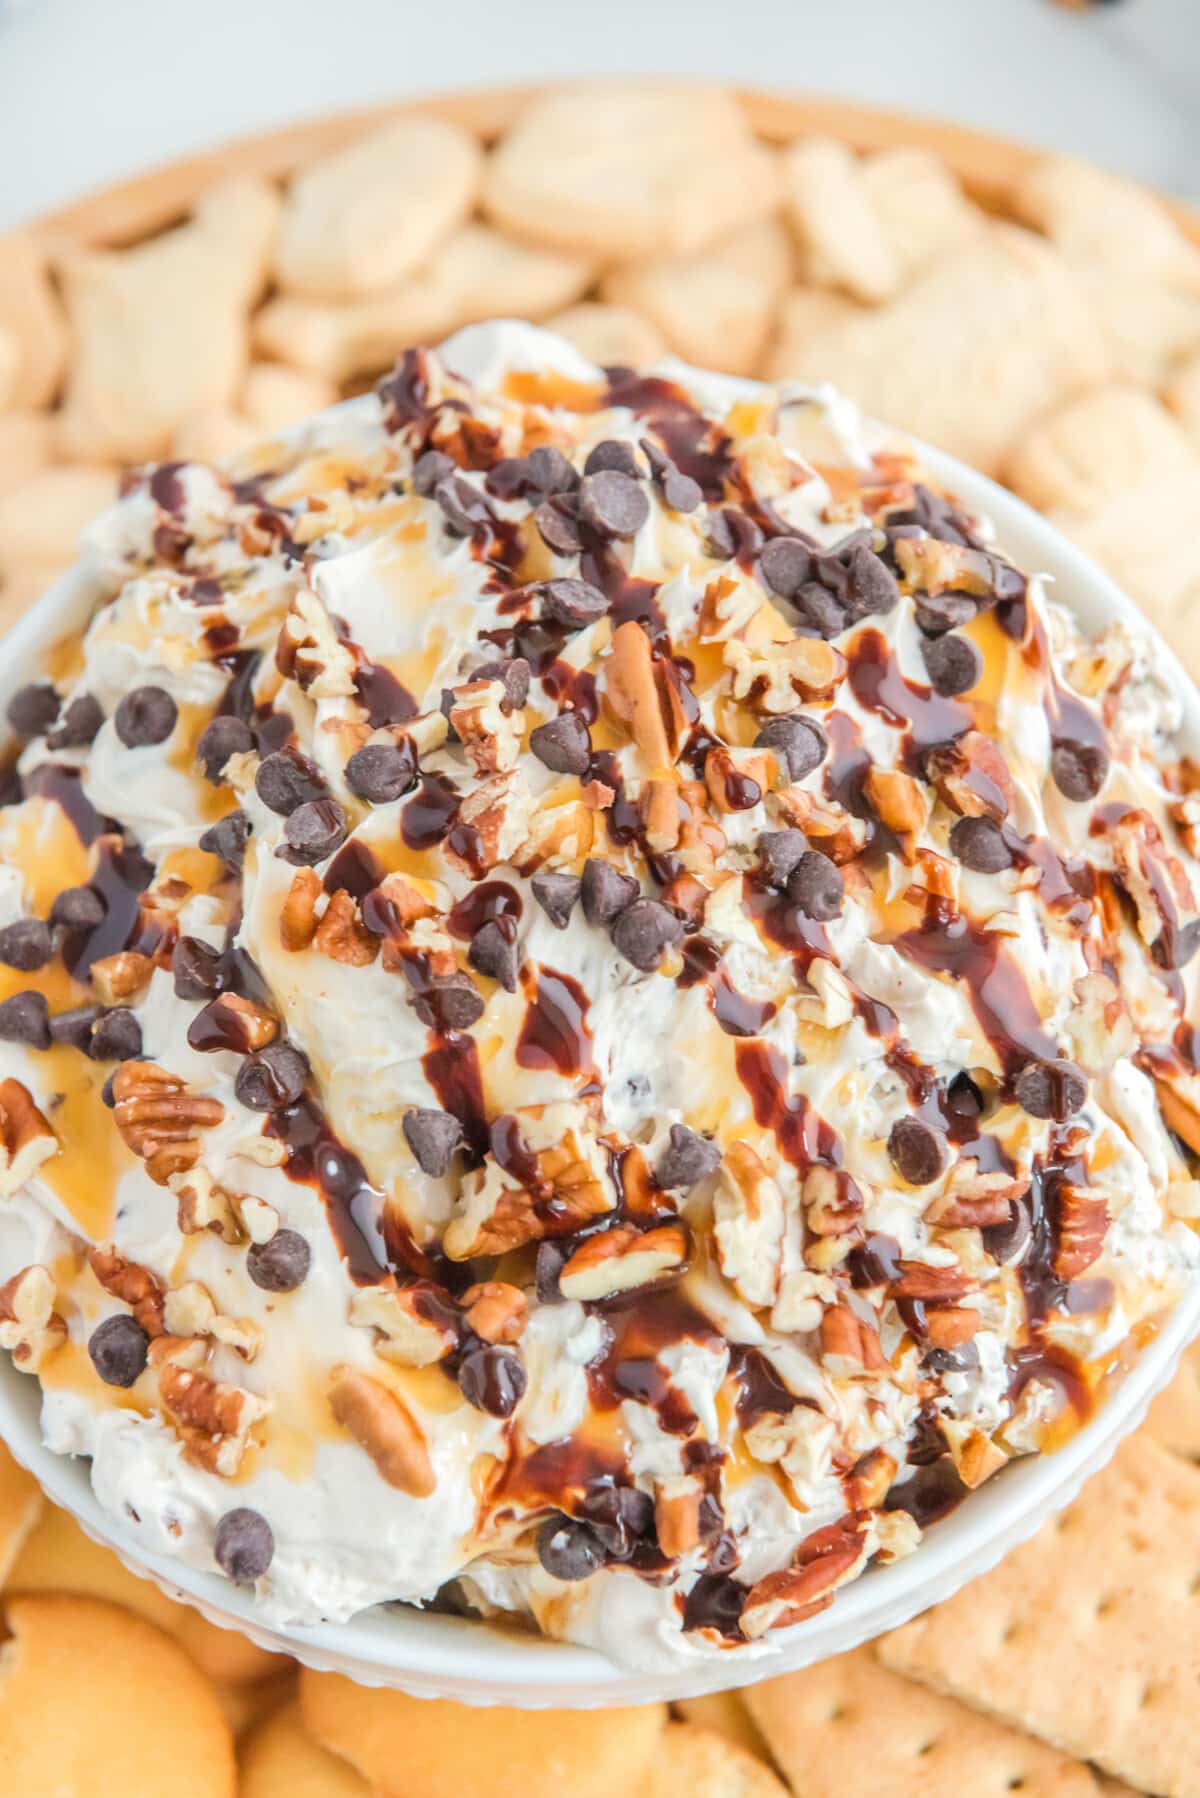 Decadent cheesecake dip featuring creamy swirls of caramel, chocolate, and pecans, invitingly displayed in a serving dish.